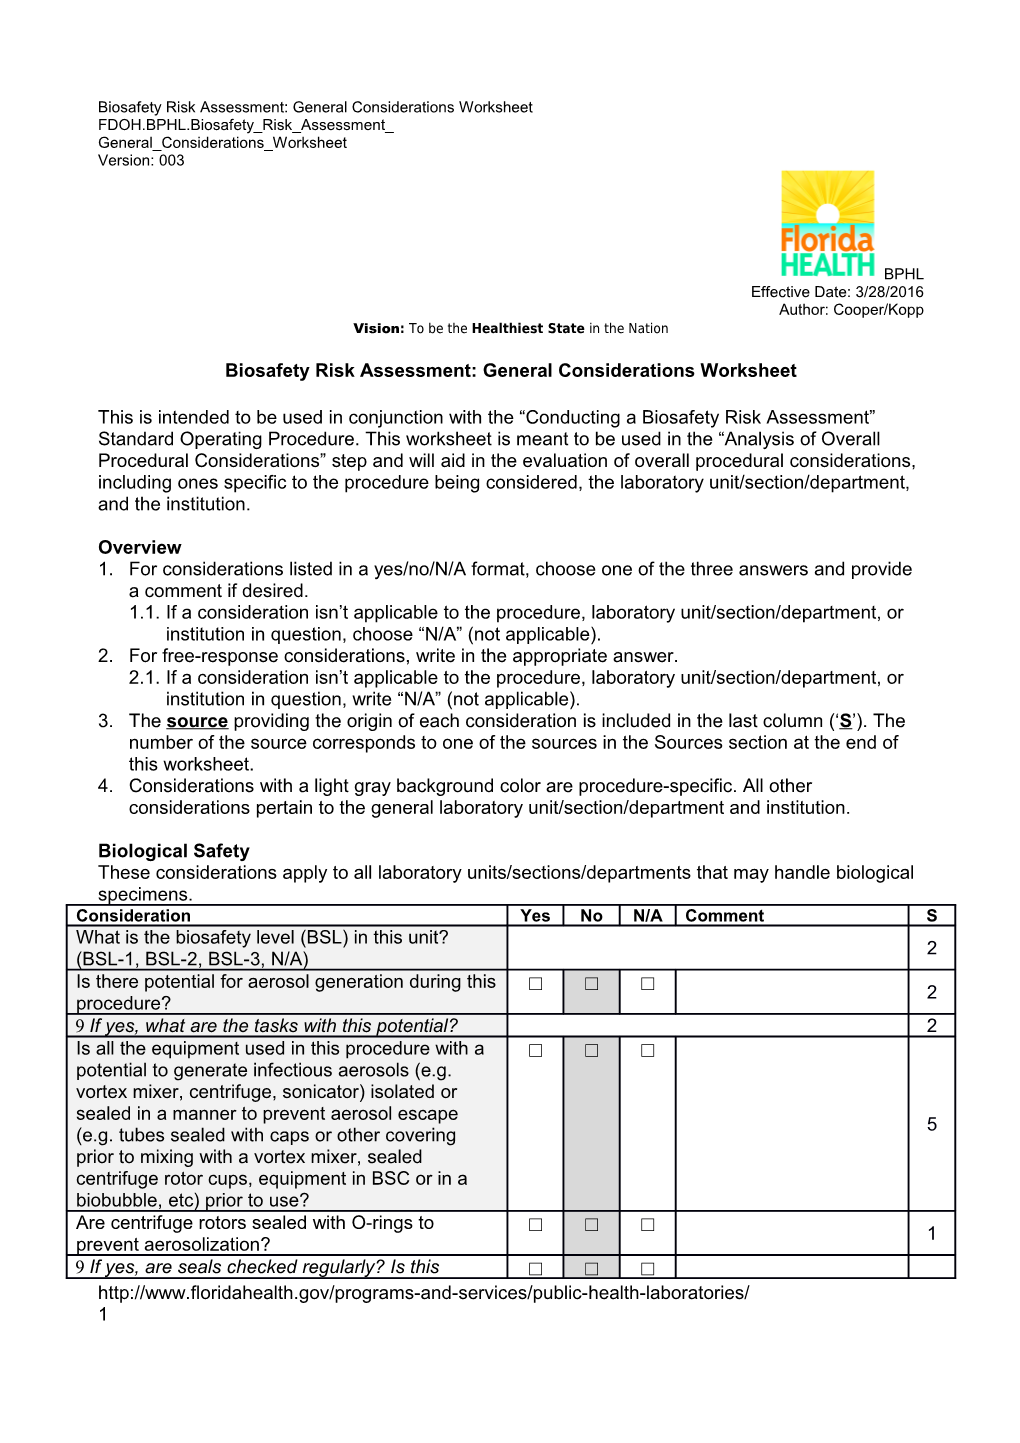 Biosafety Risk Assessment: General Considerations Worksheet